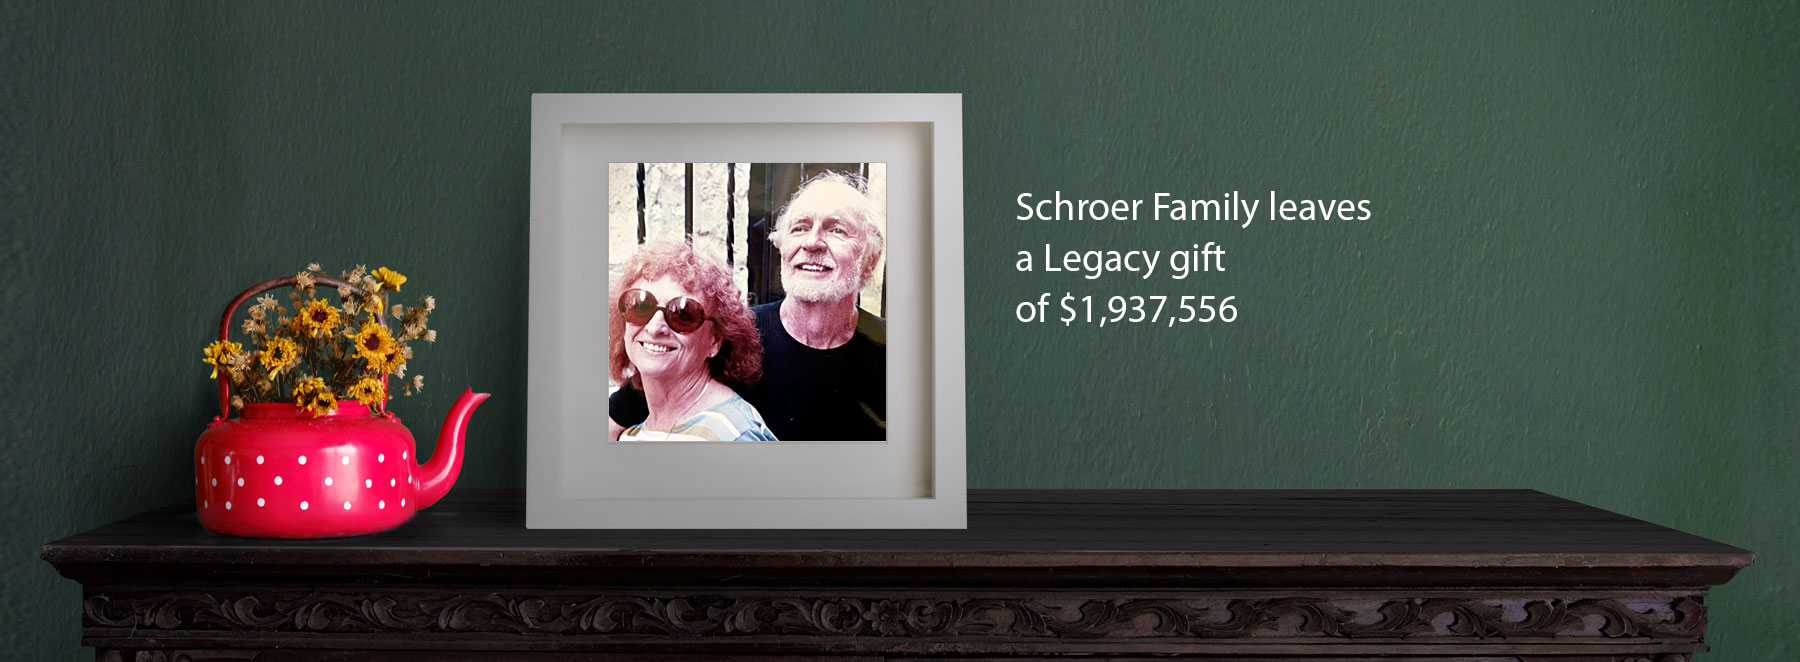 Schroer Family Legacy Gift